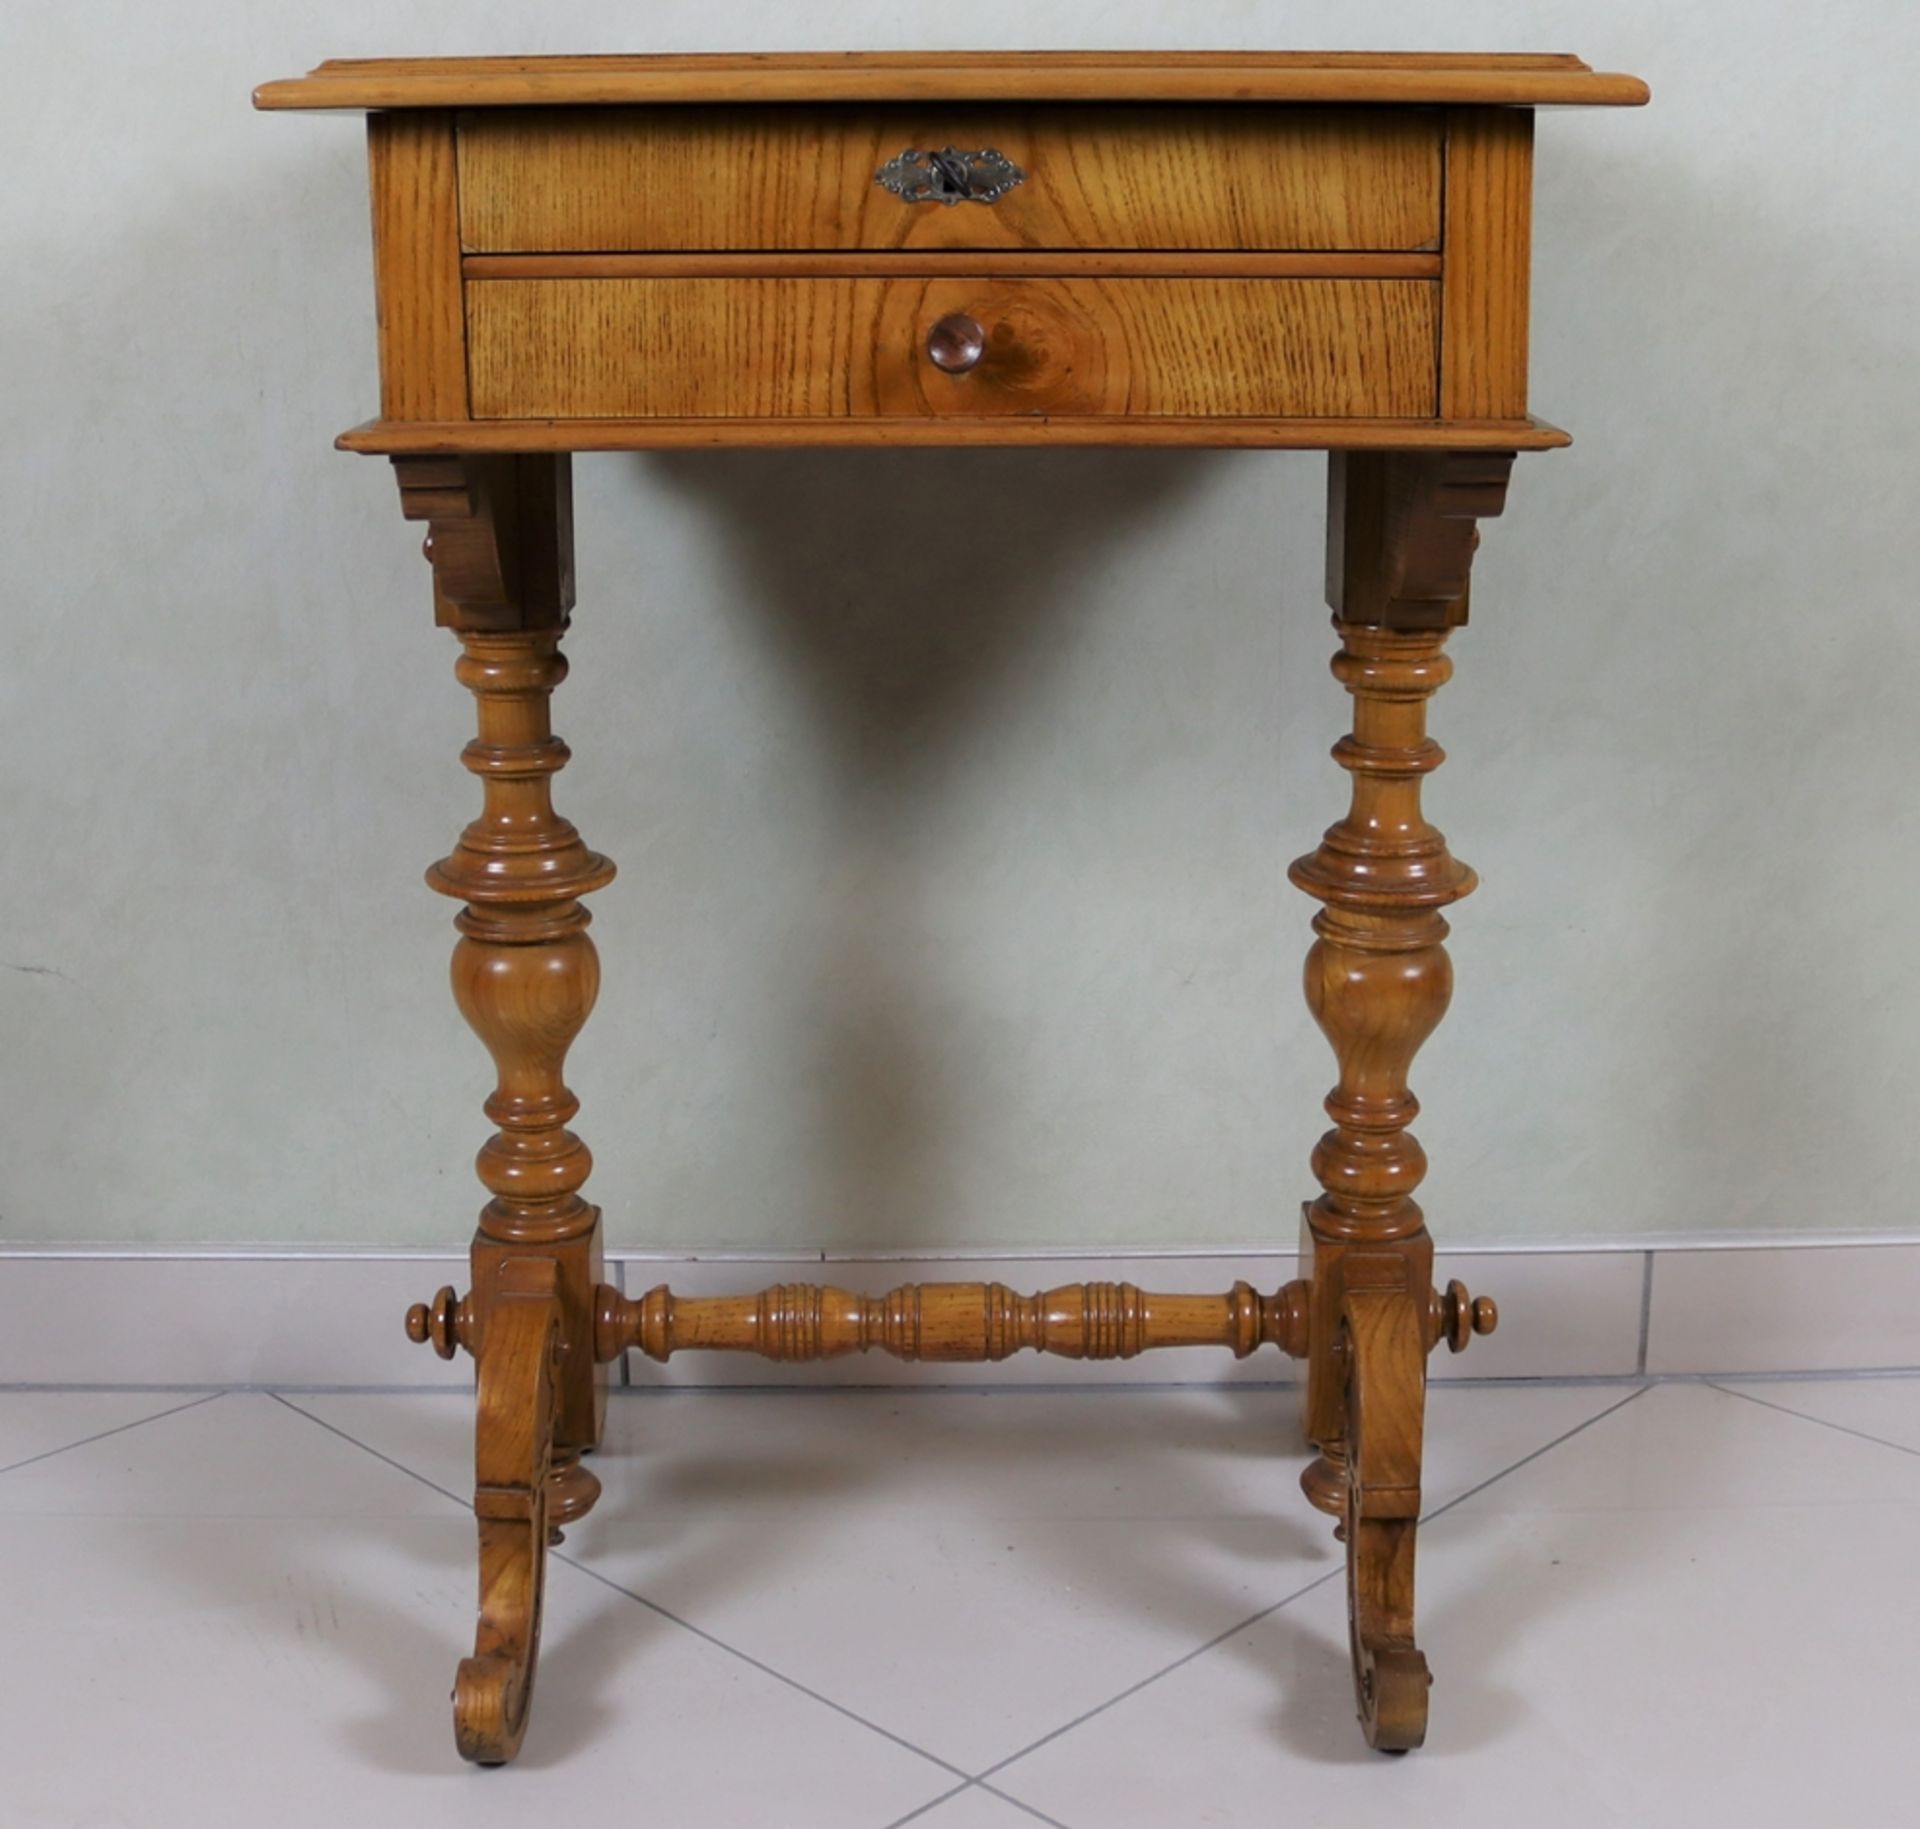 Historicist sewing table c. 1880 - 1900, Central German